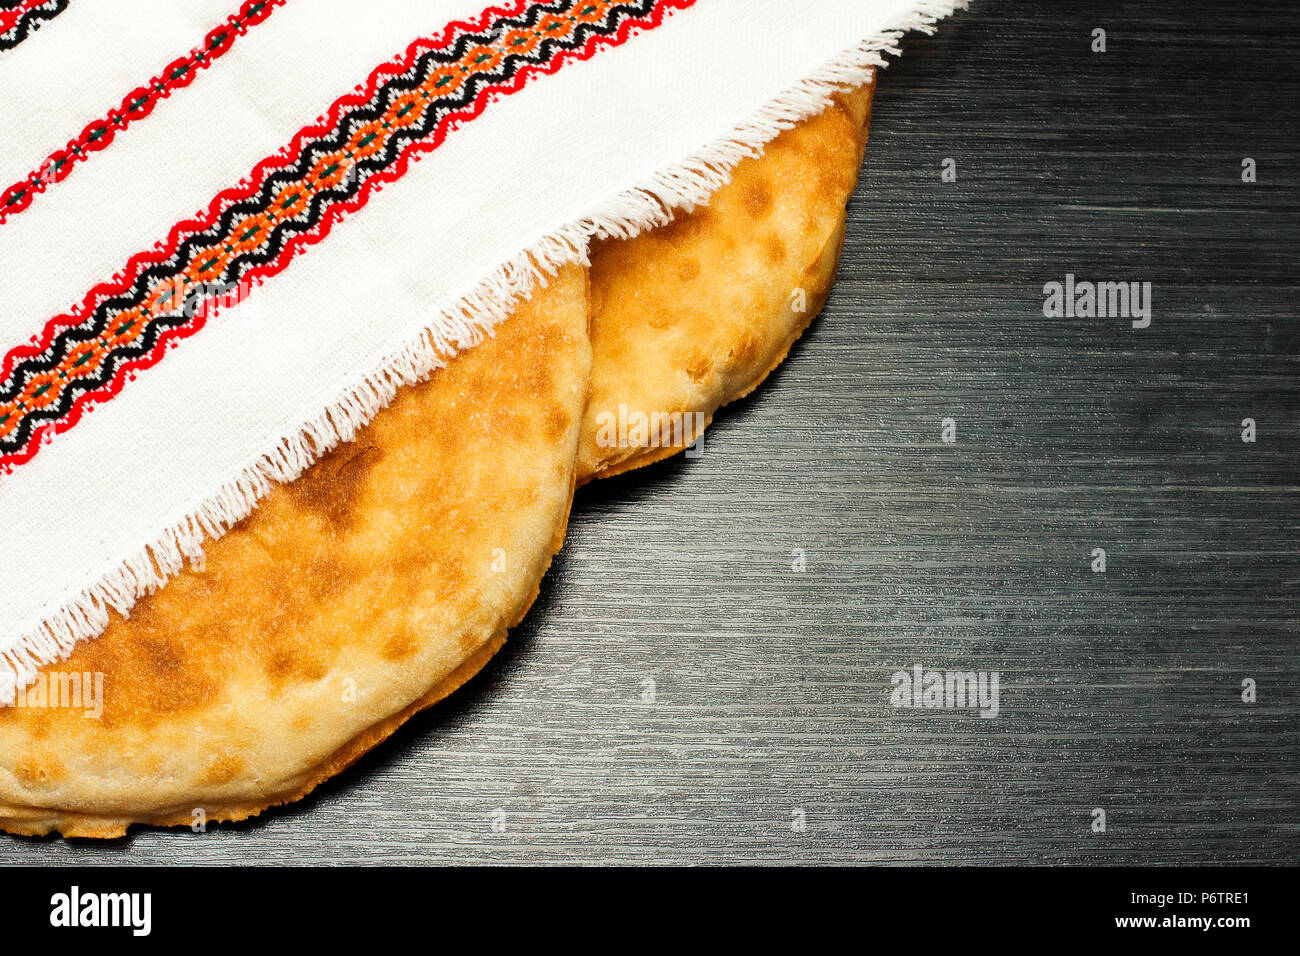 Two fresh pita bread under multicolor napkin. Wooden texture. Rustic food background. Top view. Copy space Stock Photo